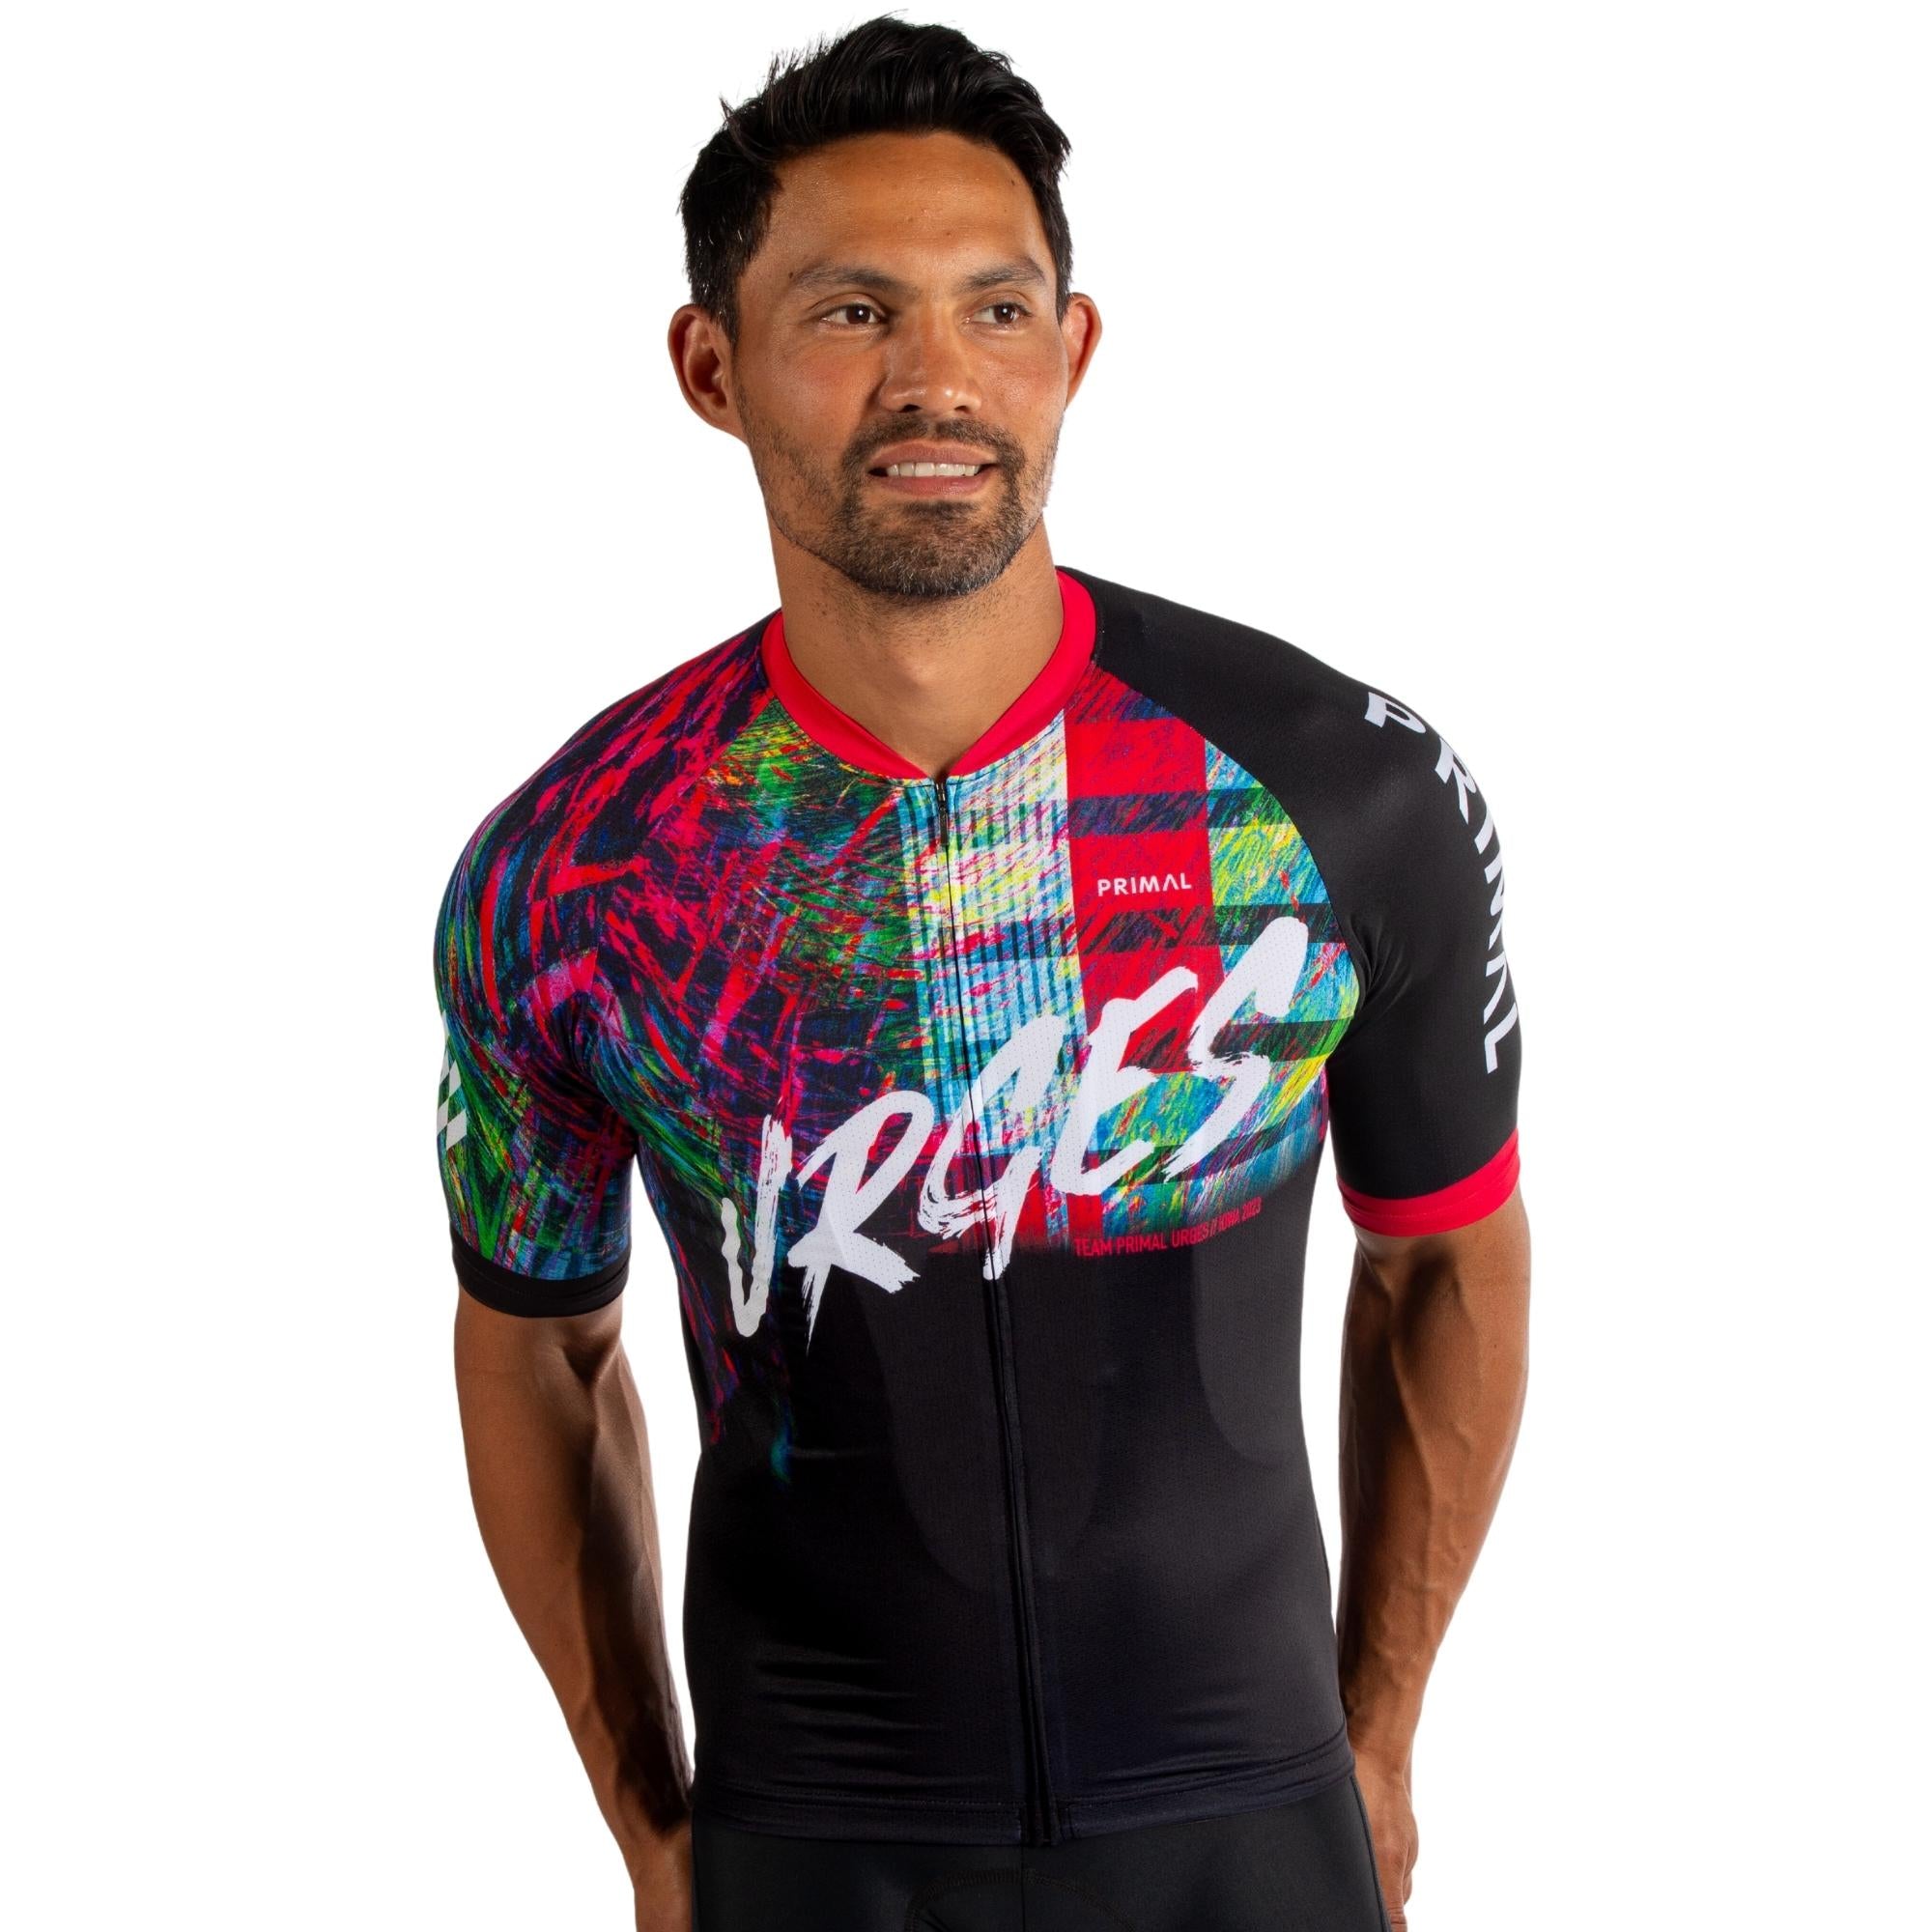 League Cyclewear now available from Primal Wear